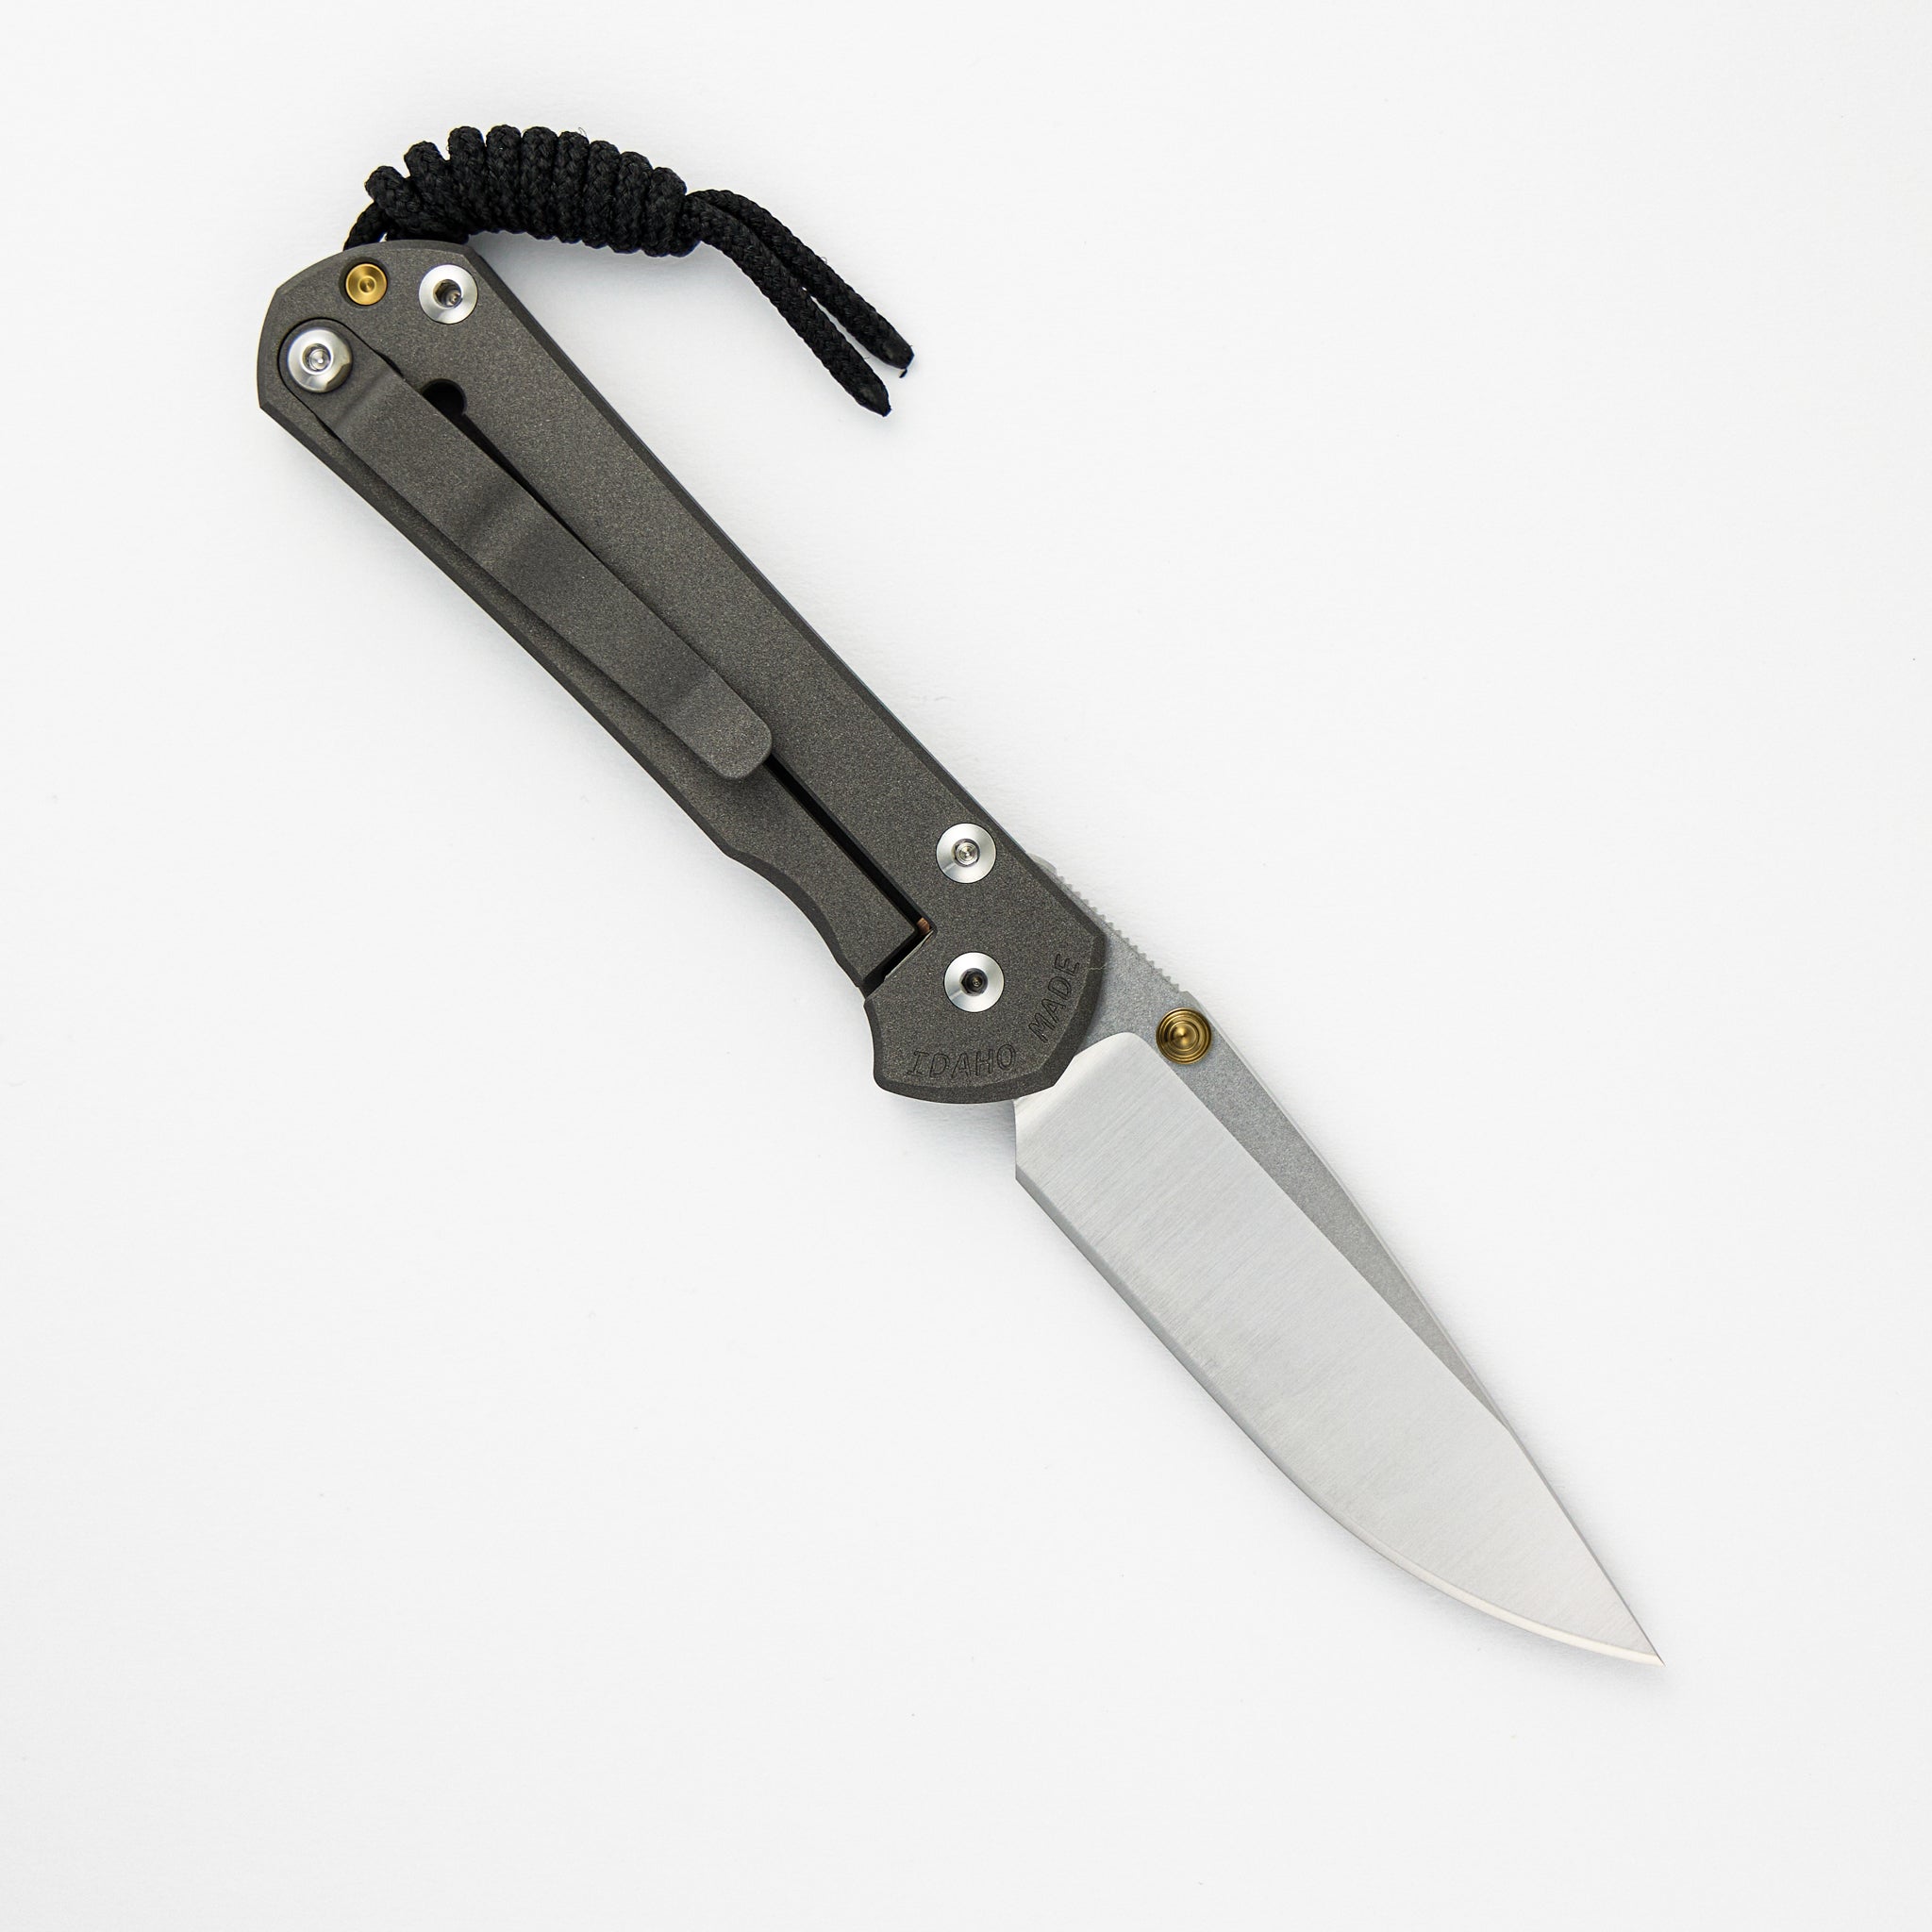 CHRIS REEVE SMALL SEBENZA 31 – POLISHED CPM MAGNACUT BLADE – GOLD DOUBLE THUMB LUGS